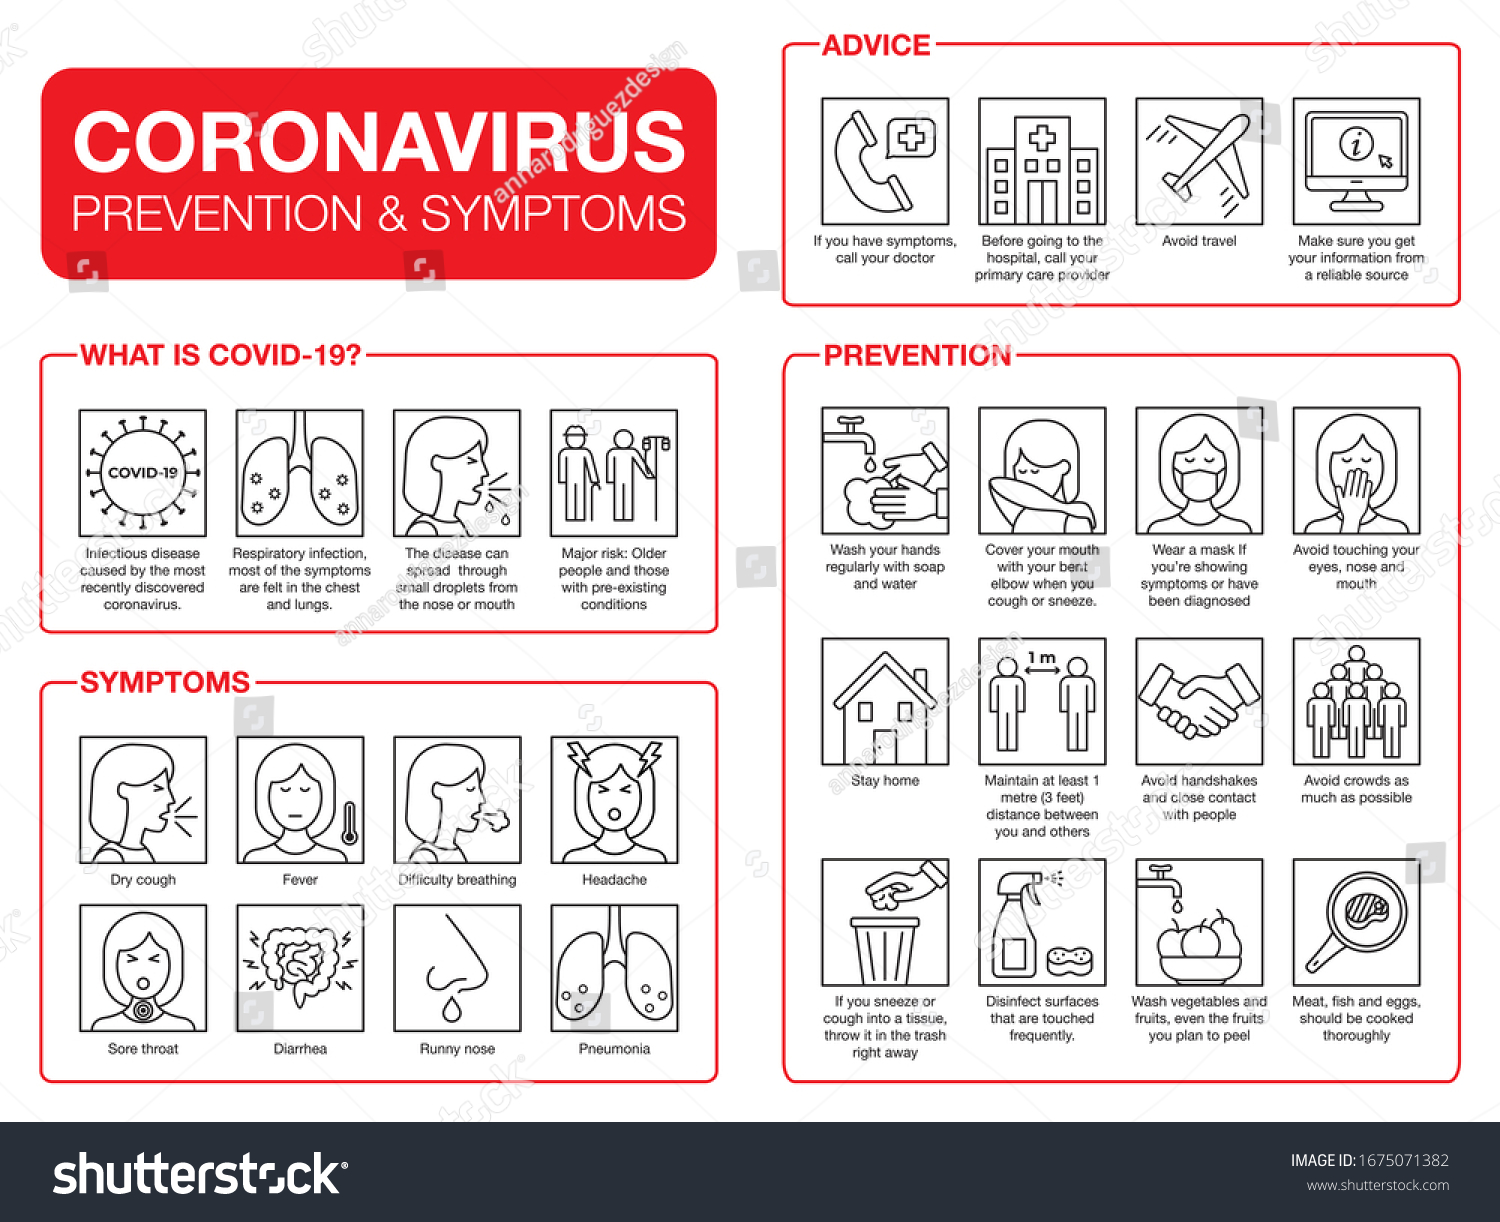 Coronavirus pandemic infographic. Covid-19 prevention, symptoms and spreading vectors. Virus line icon set for websites. 2019-nCoV protection tips. Covid outbreak spread information.  #1675071382